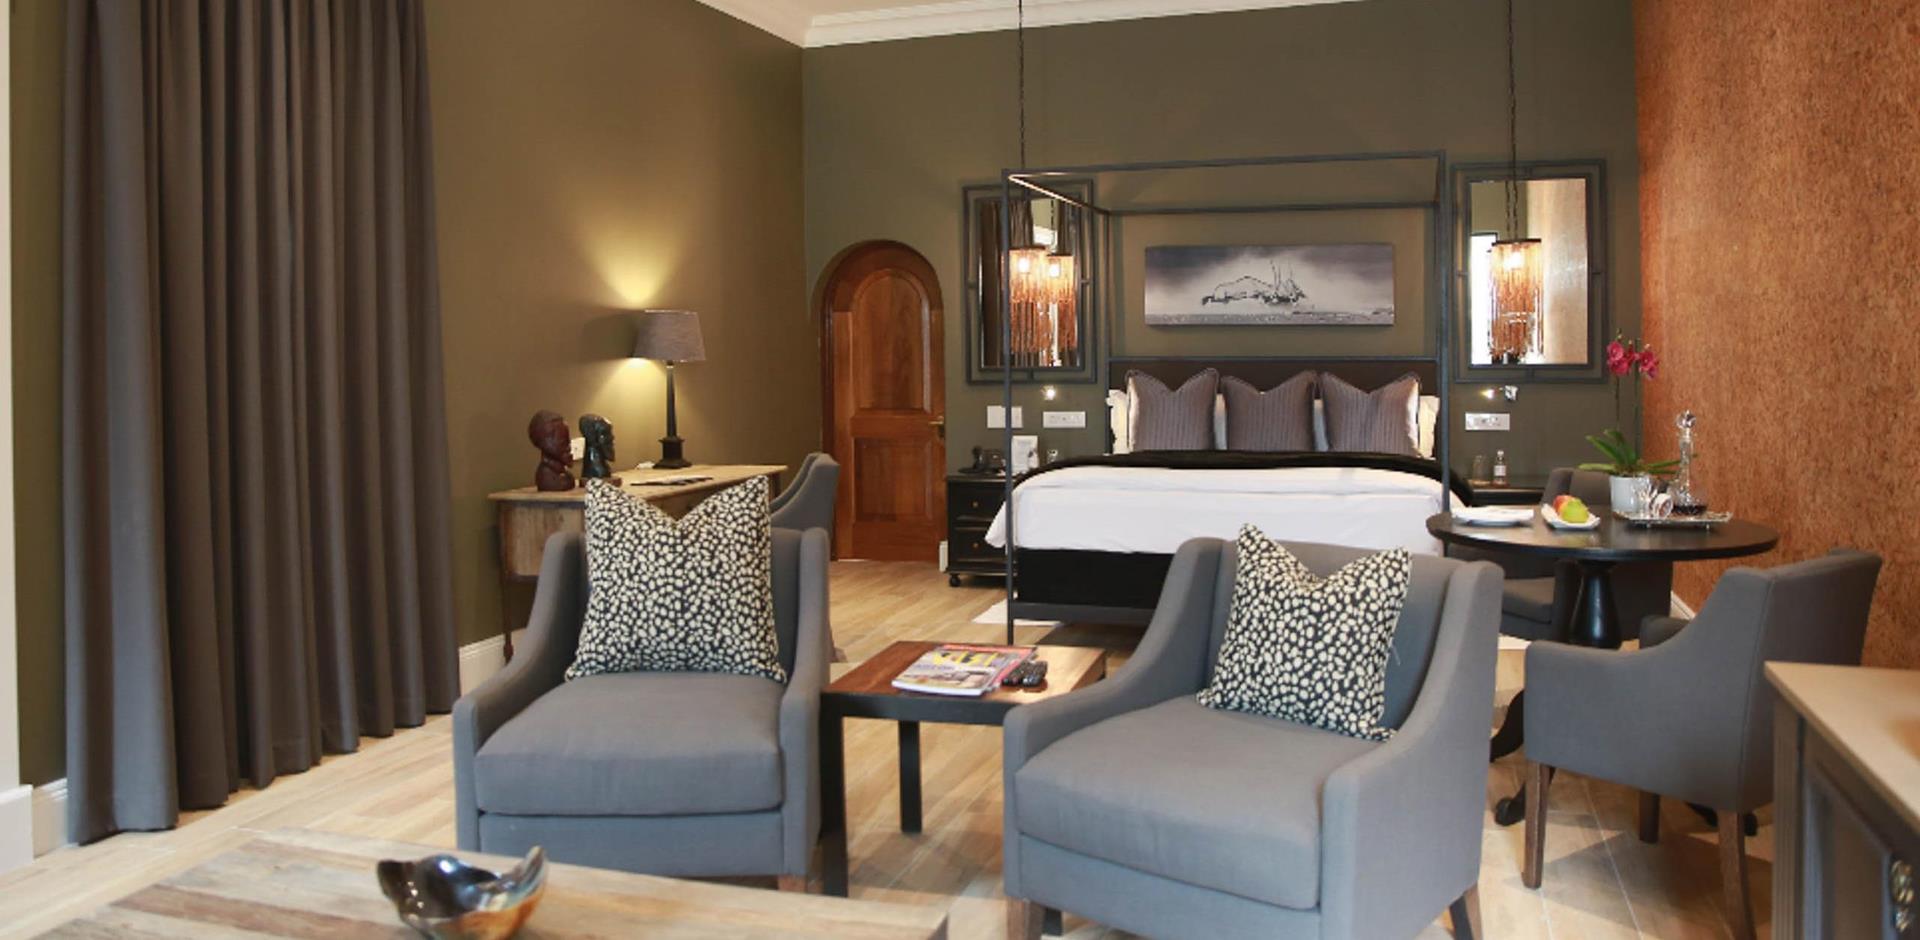 Bedroom, Fairlawns Boutique Hotel & Spa, South Africa, A&K